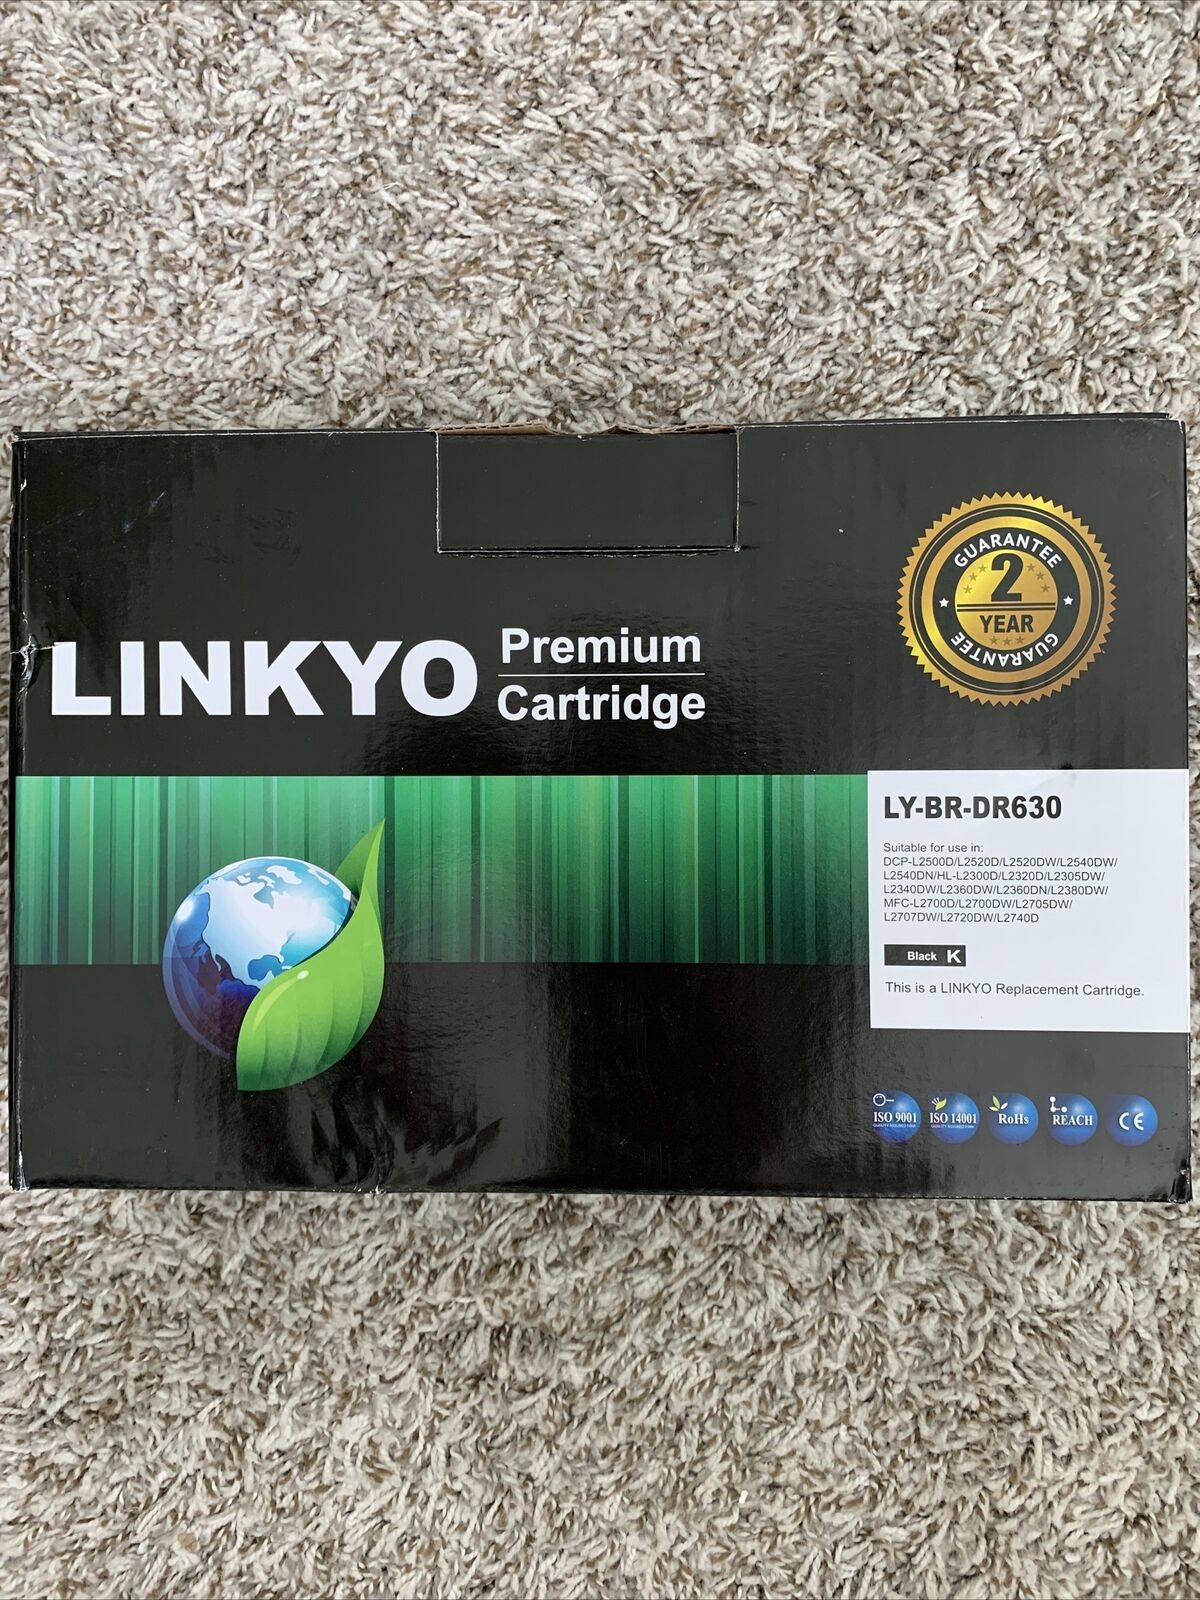 Linkyo Premium Replacement Cartridge LY-BR-DR630 Black NEW 💥Box May Have Damage